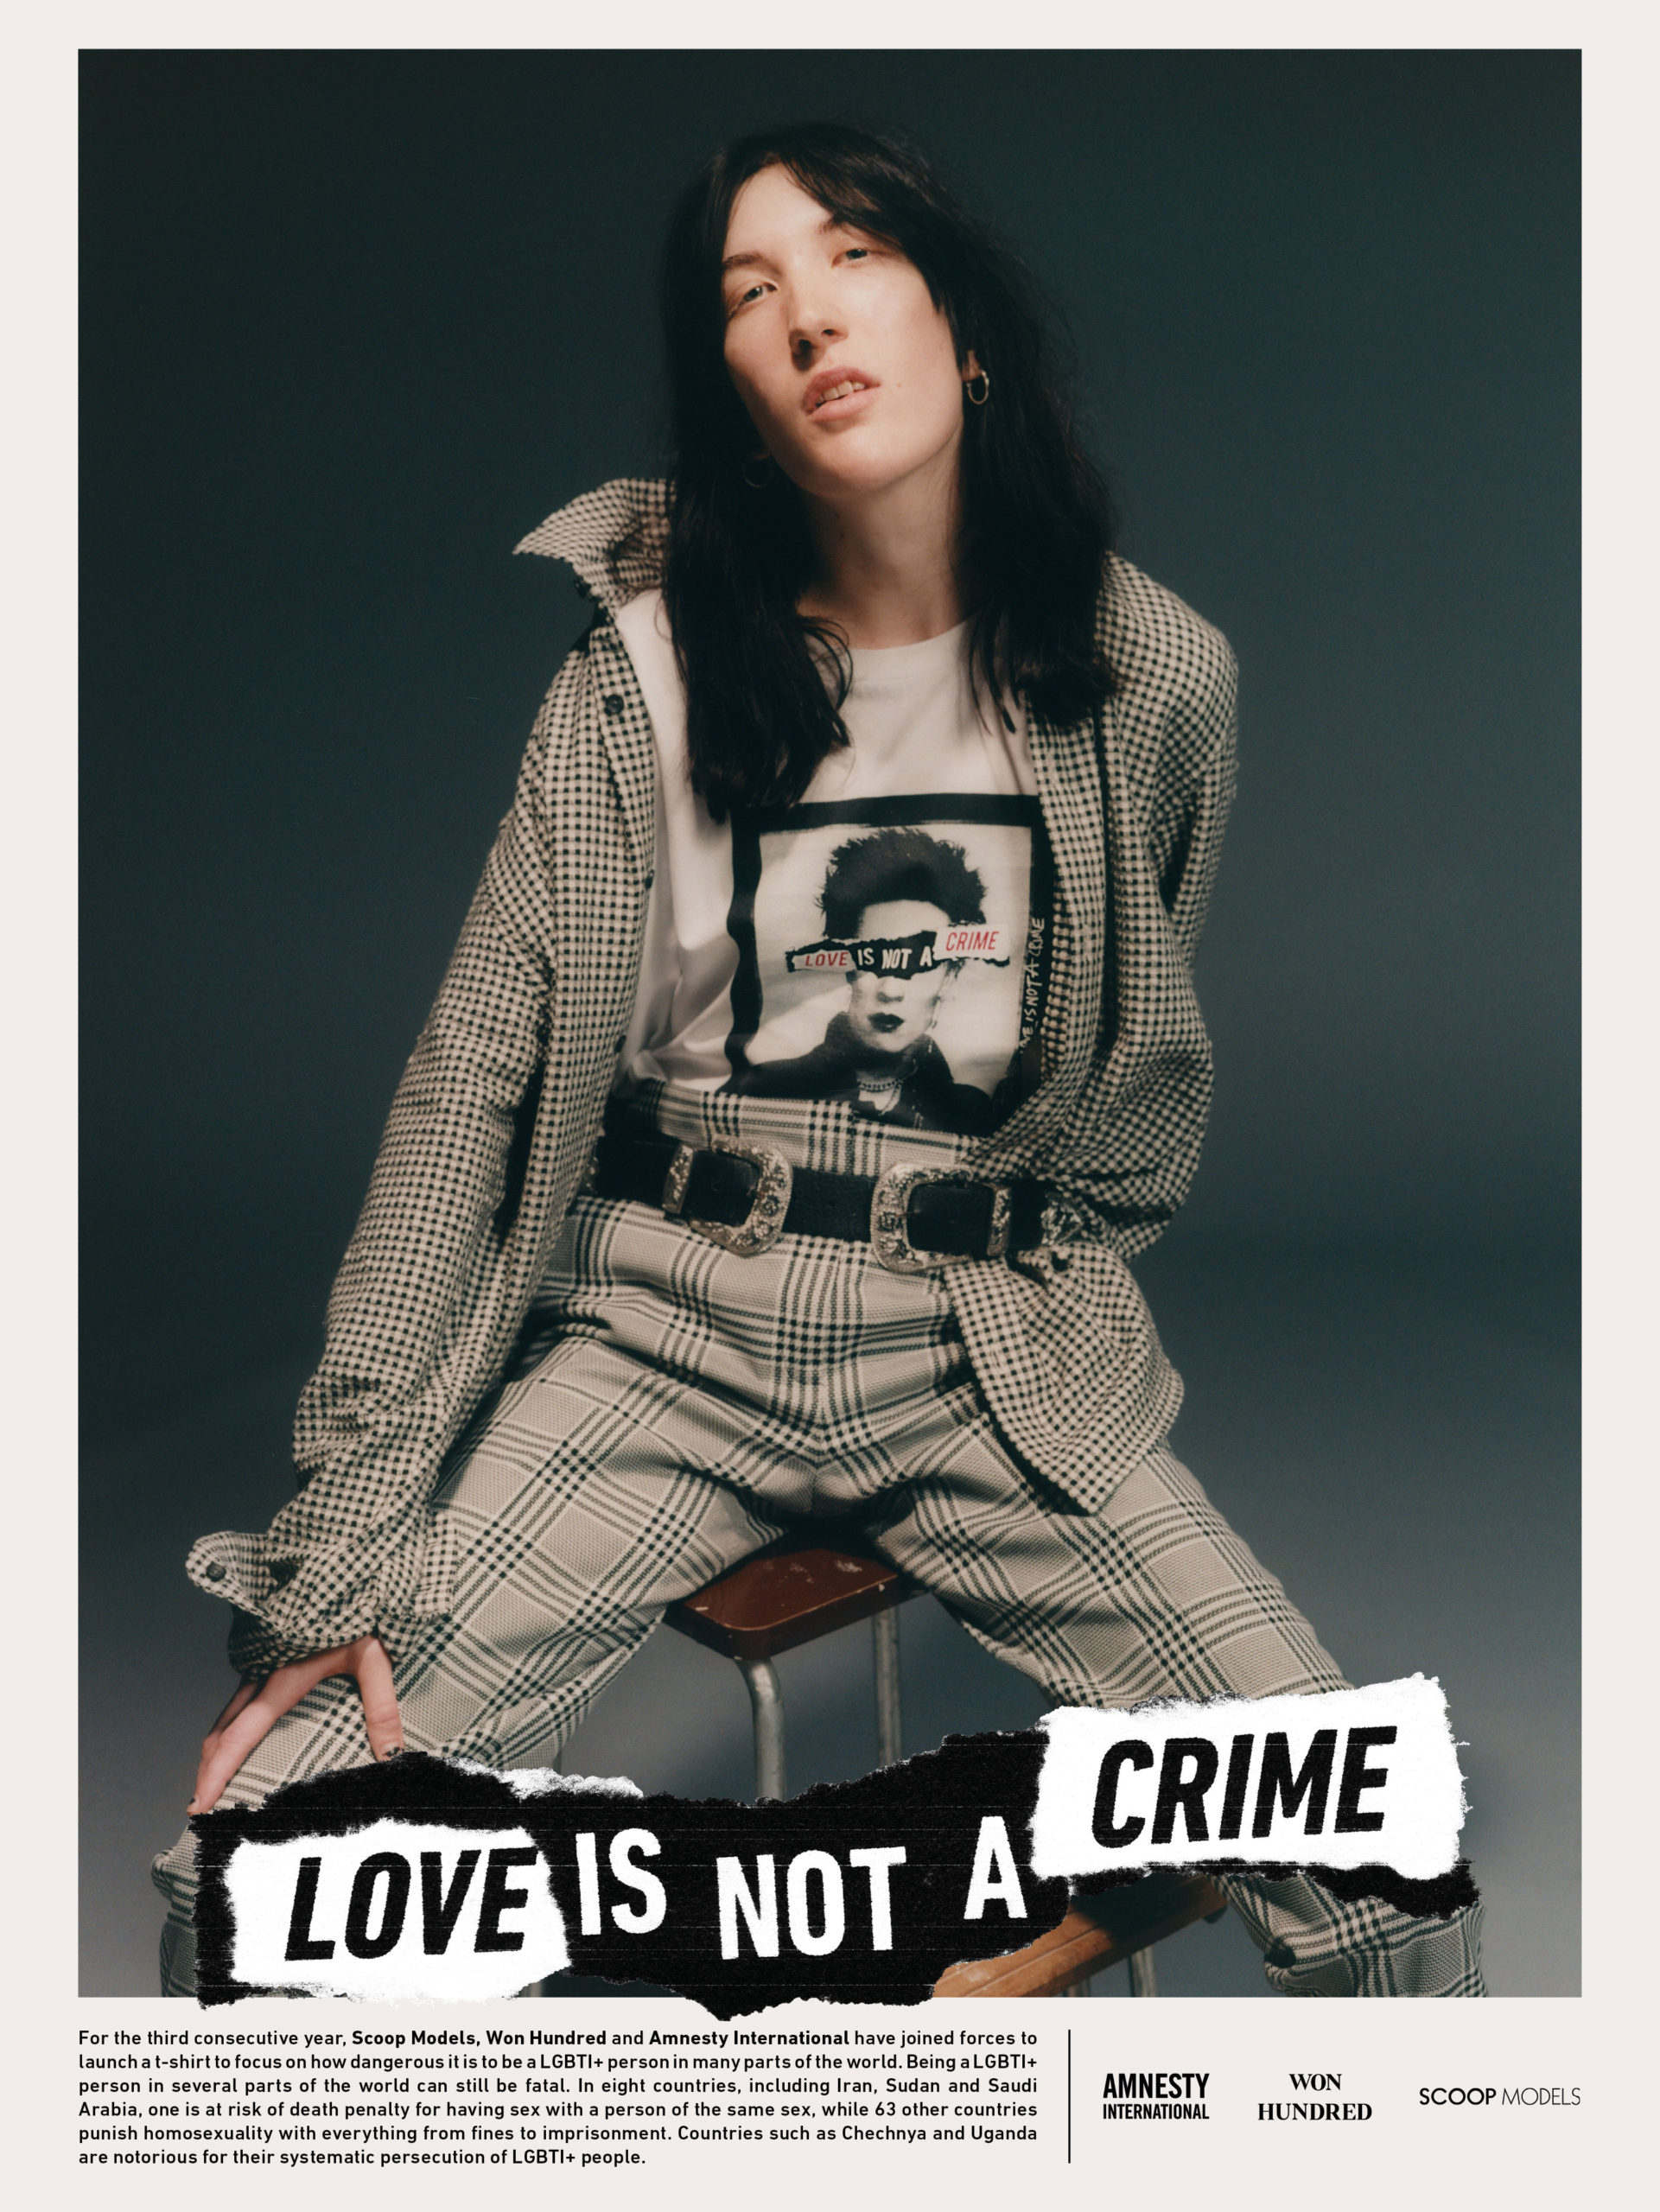 LOVE IS NOT A CRIME